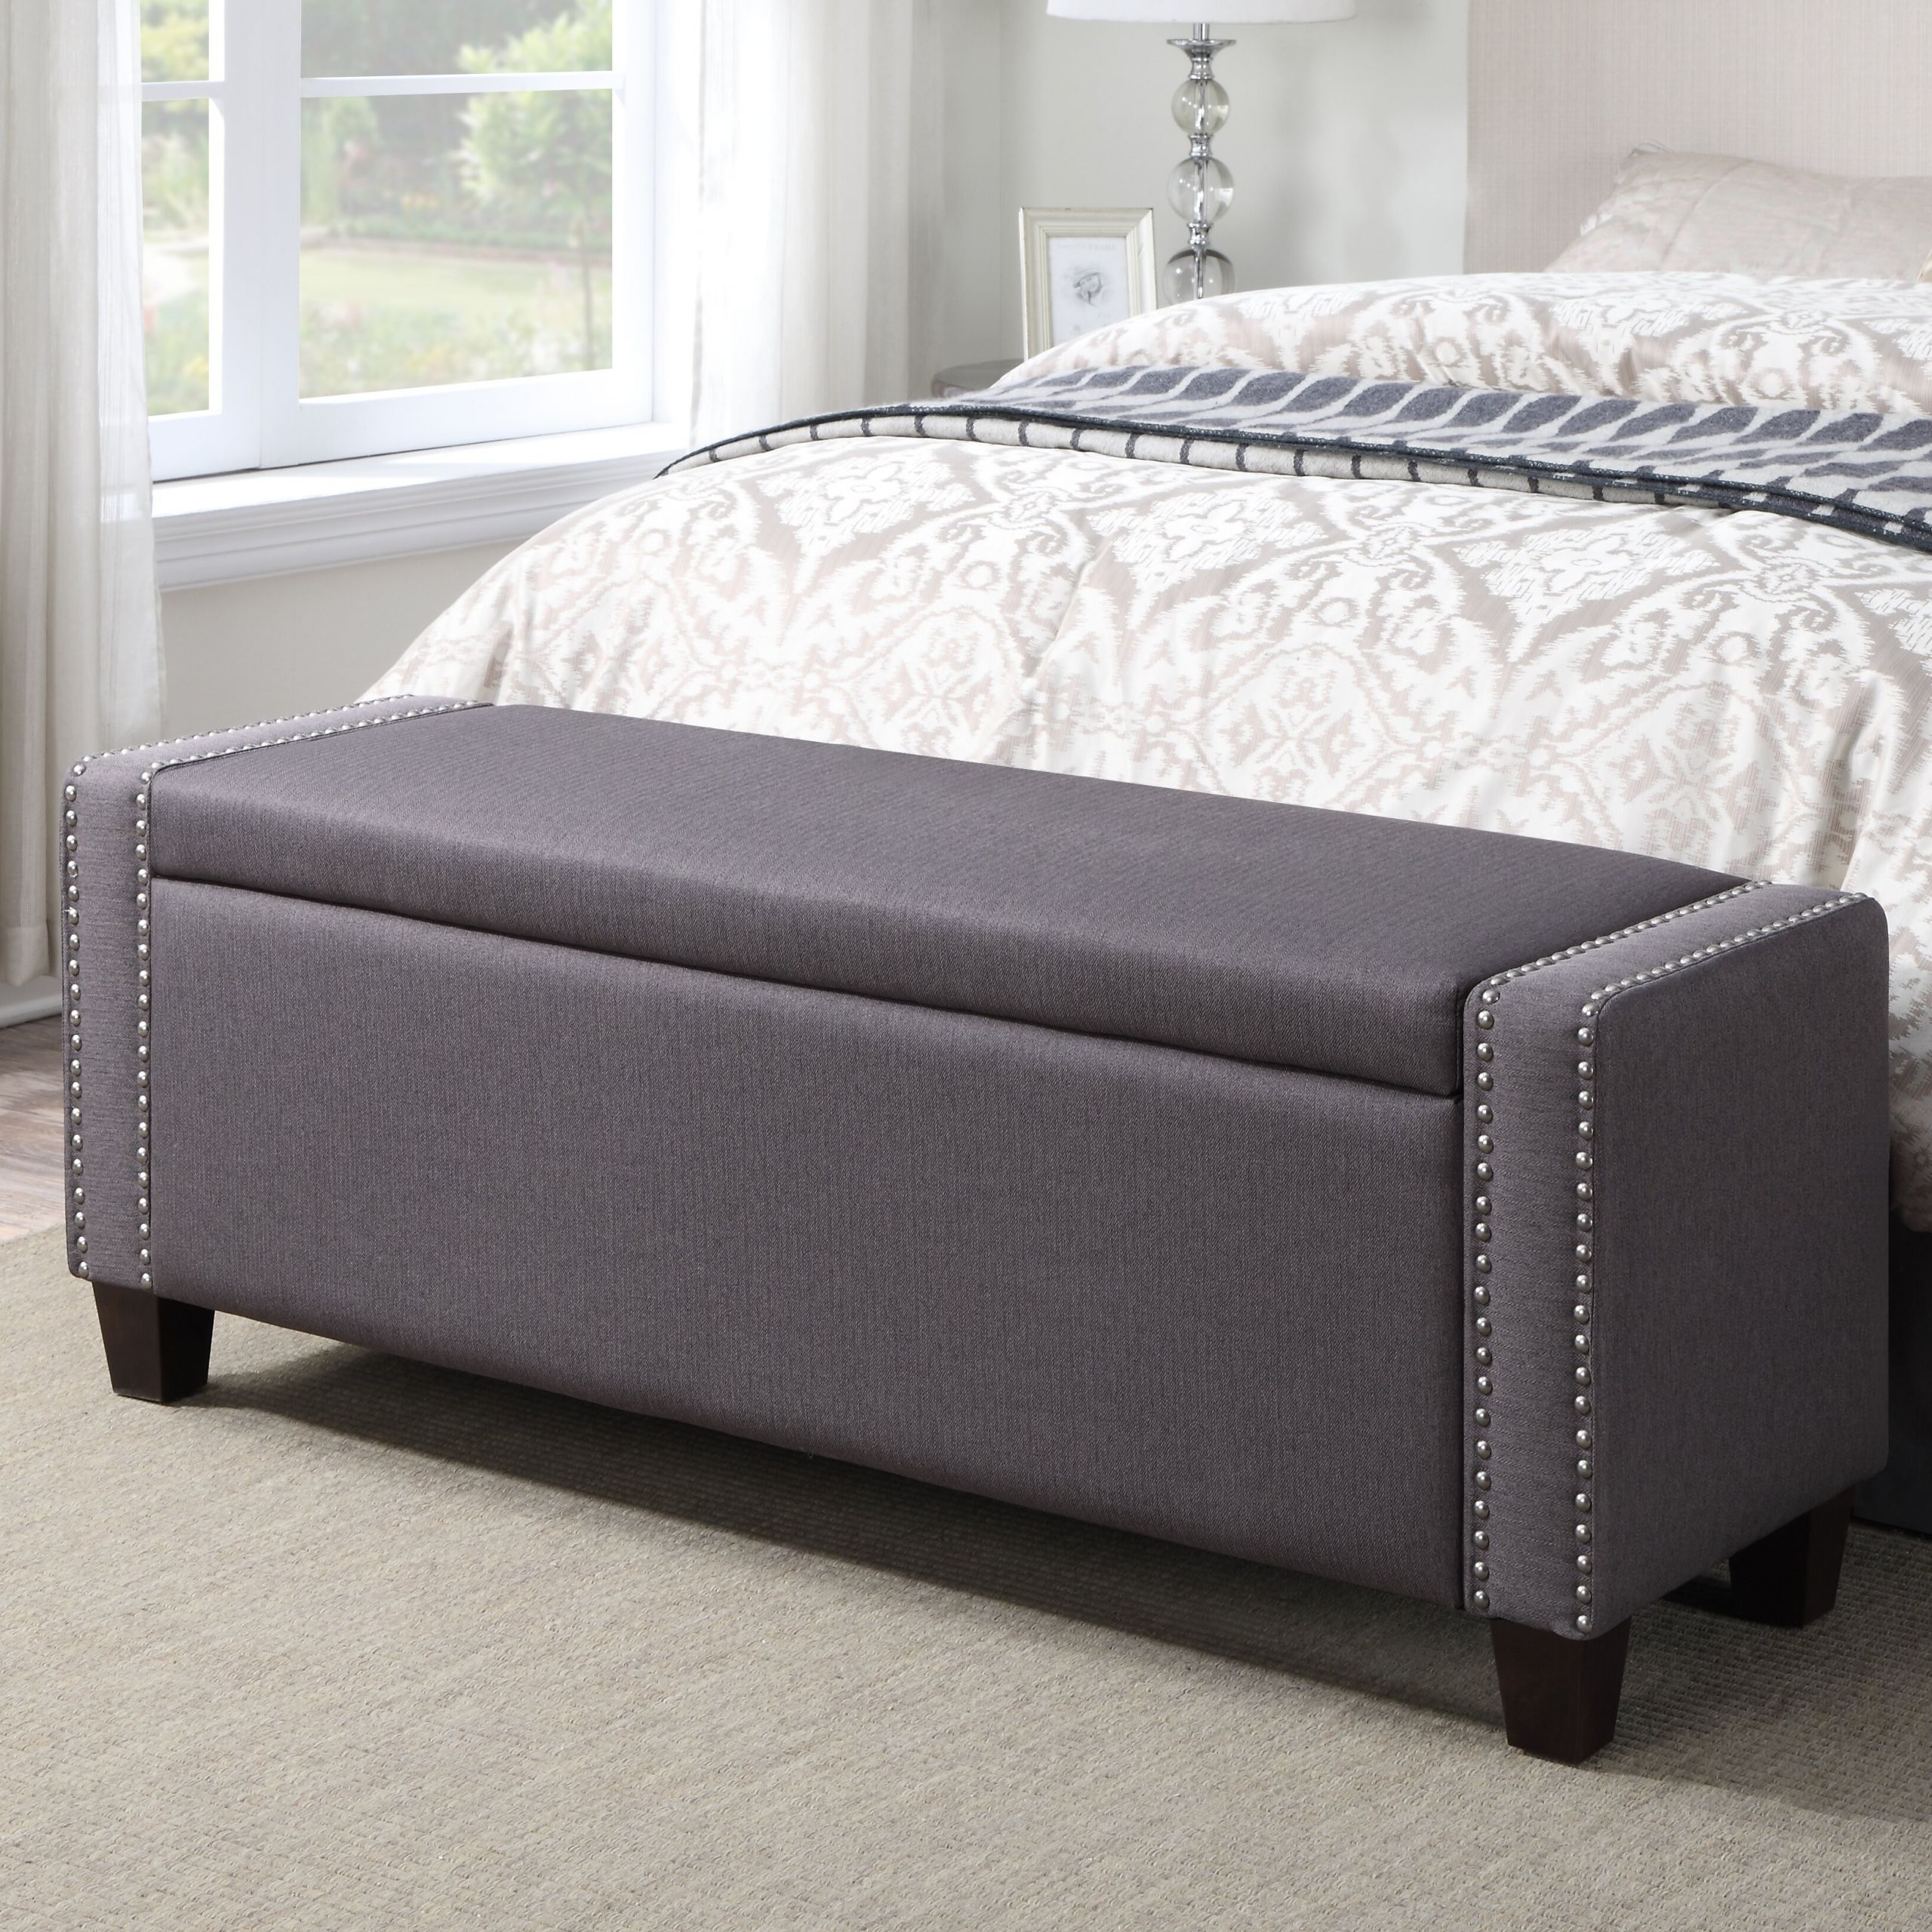 Bedroom Storage Bench: Combining Functionality And Style